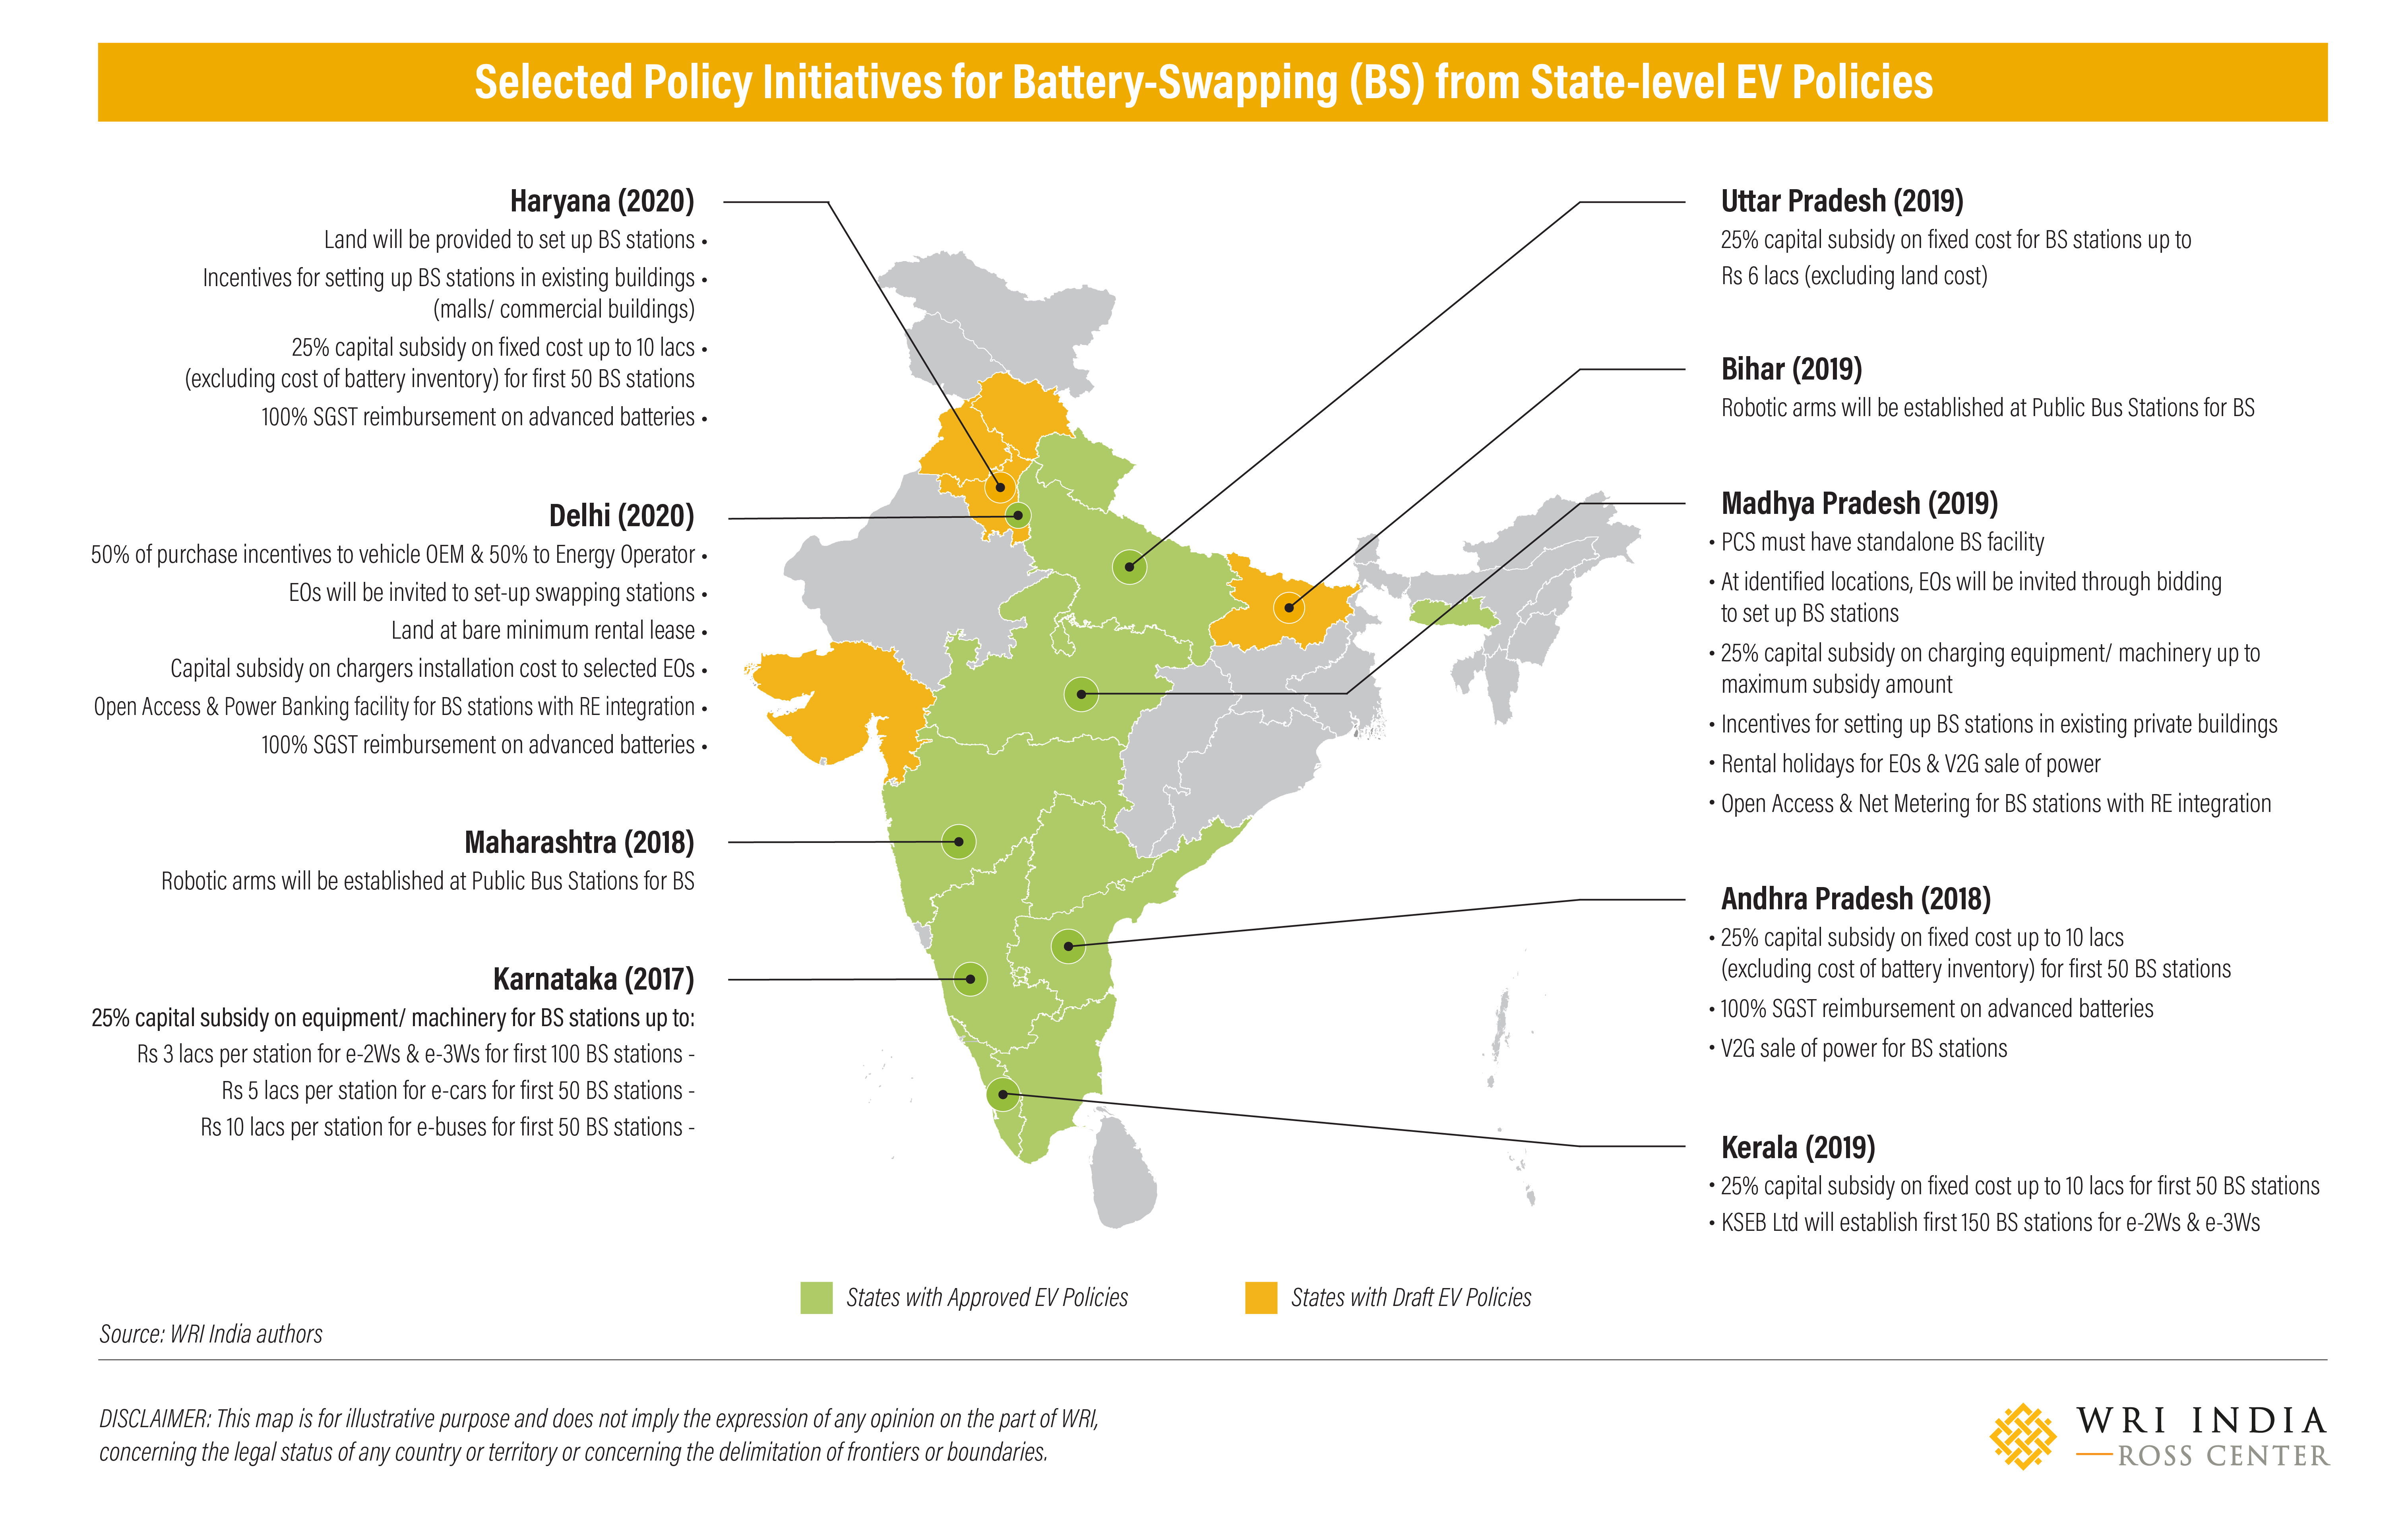 Selected Policy Initiatives for Battery-Swapping (BS) from State-level EV Policies.